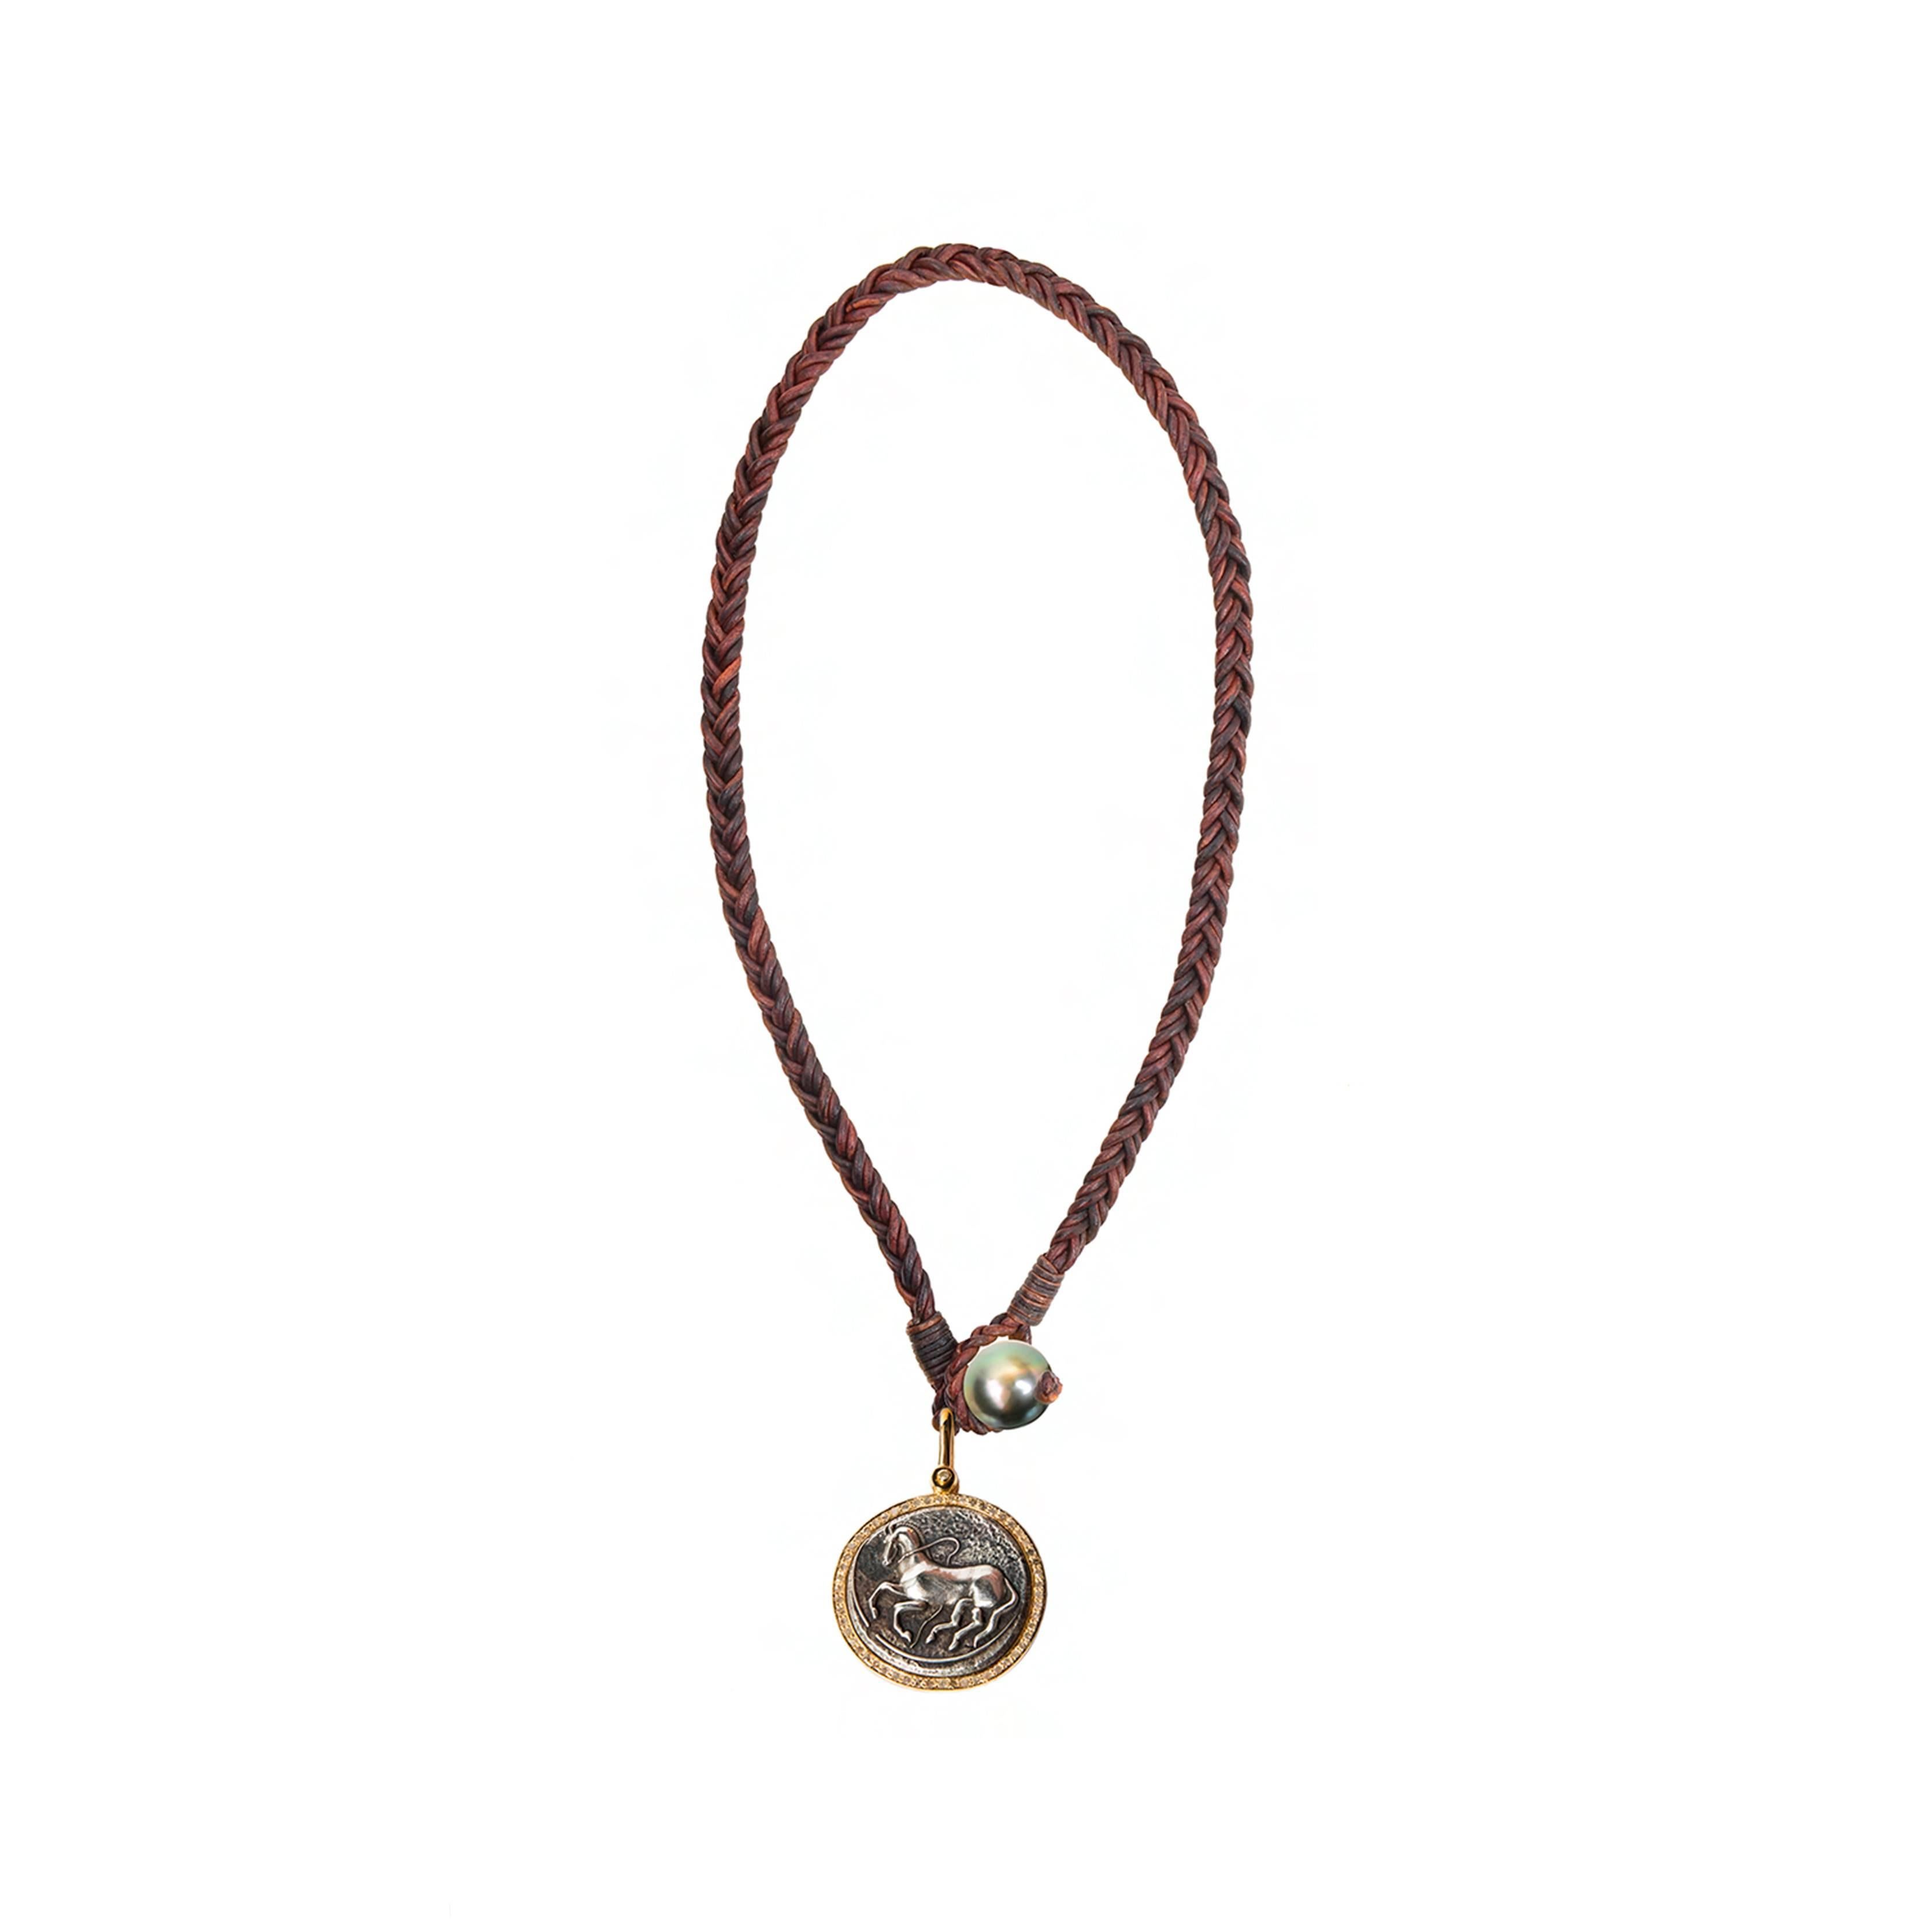 Trojan Coin Necklace with premium braided brown leather cord, designed by American Designer, Vincent Peach. This necklace has Sterling Silver Trojan coin encircled by 10k Yellow Gold bezel and a Tahitian Pearl and loop closure.  Standard 17 inches